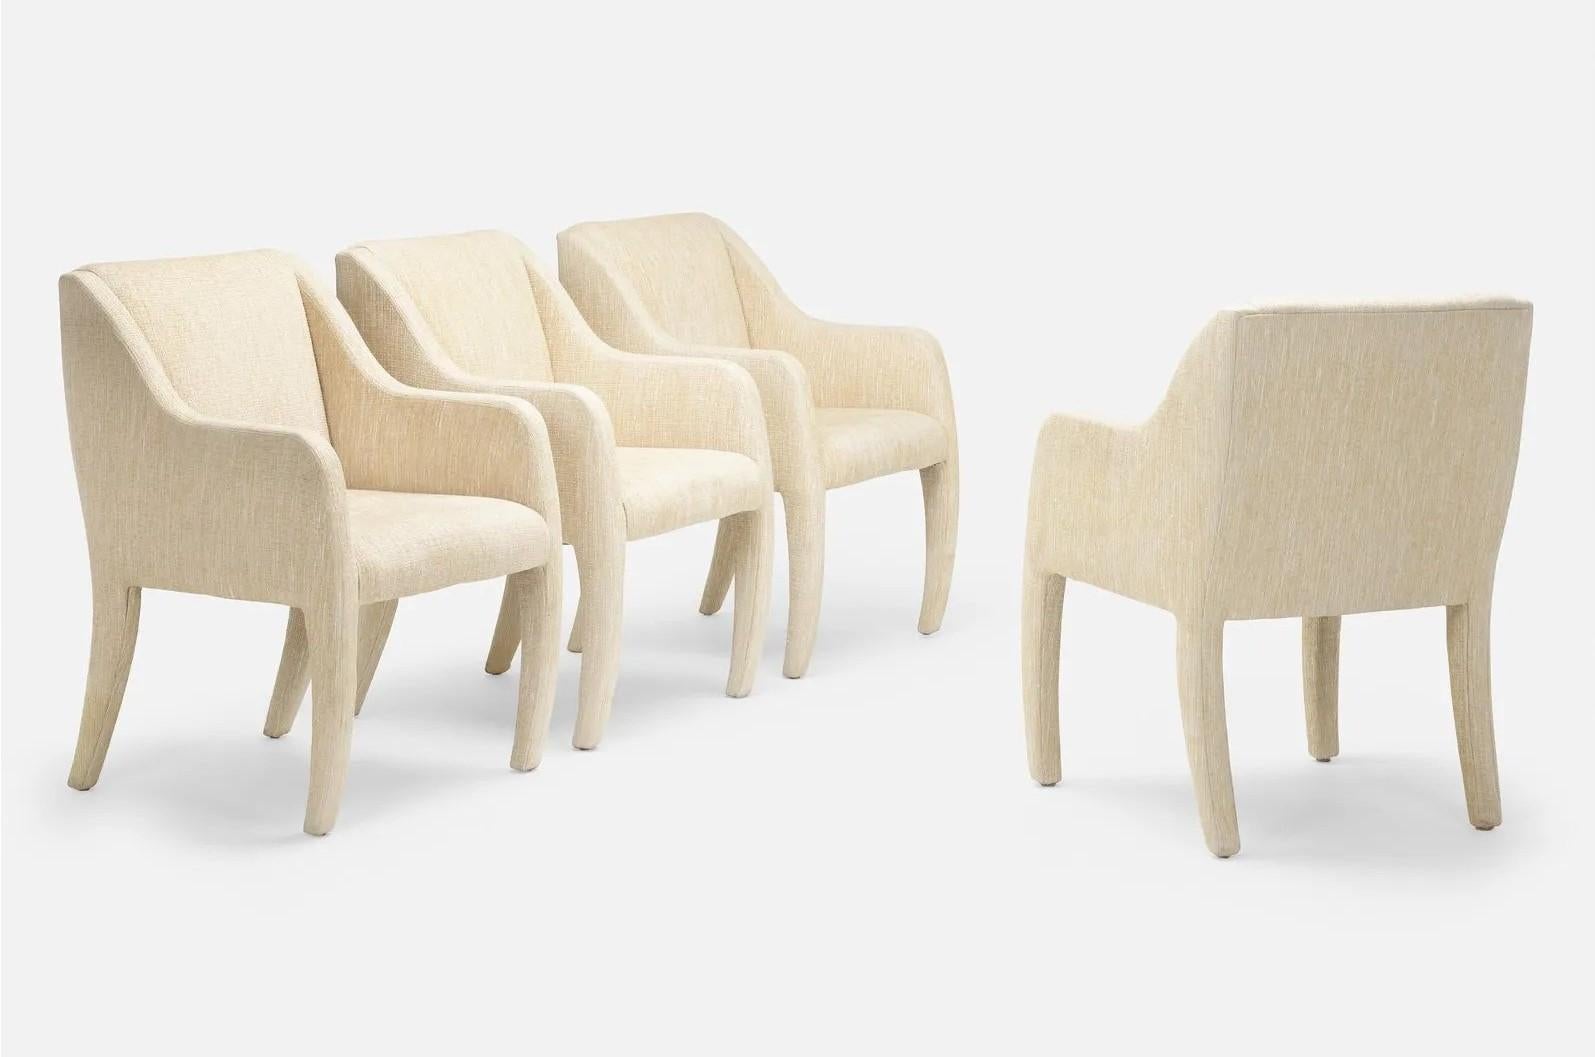 Set of four dining chairs by Directional. The chairs have the original upholstery and a nice sculptural design.